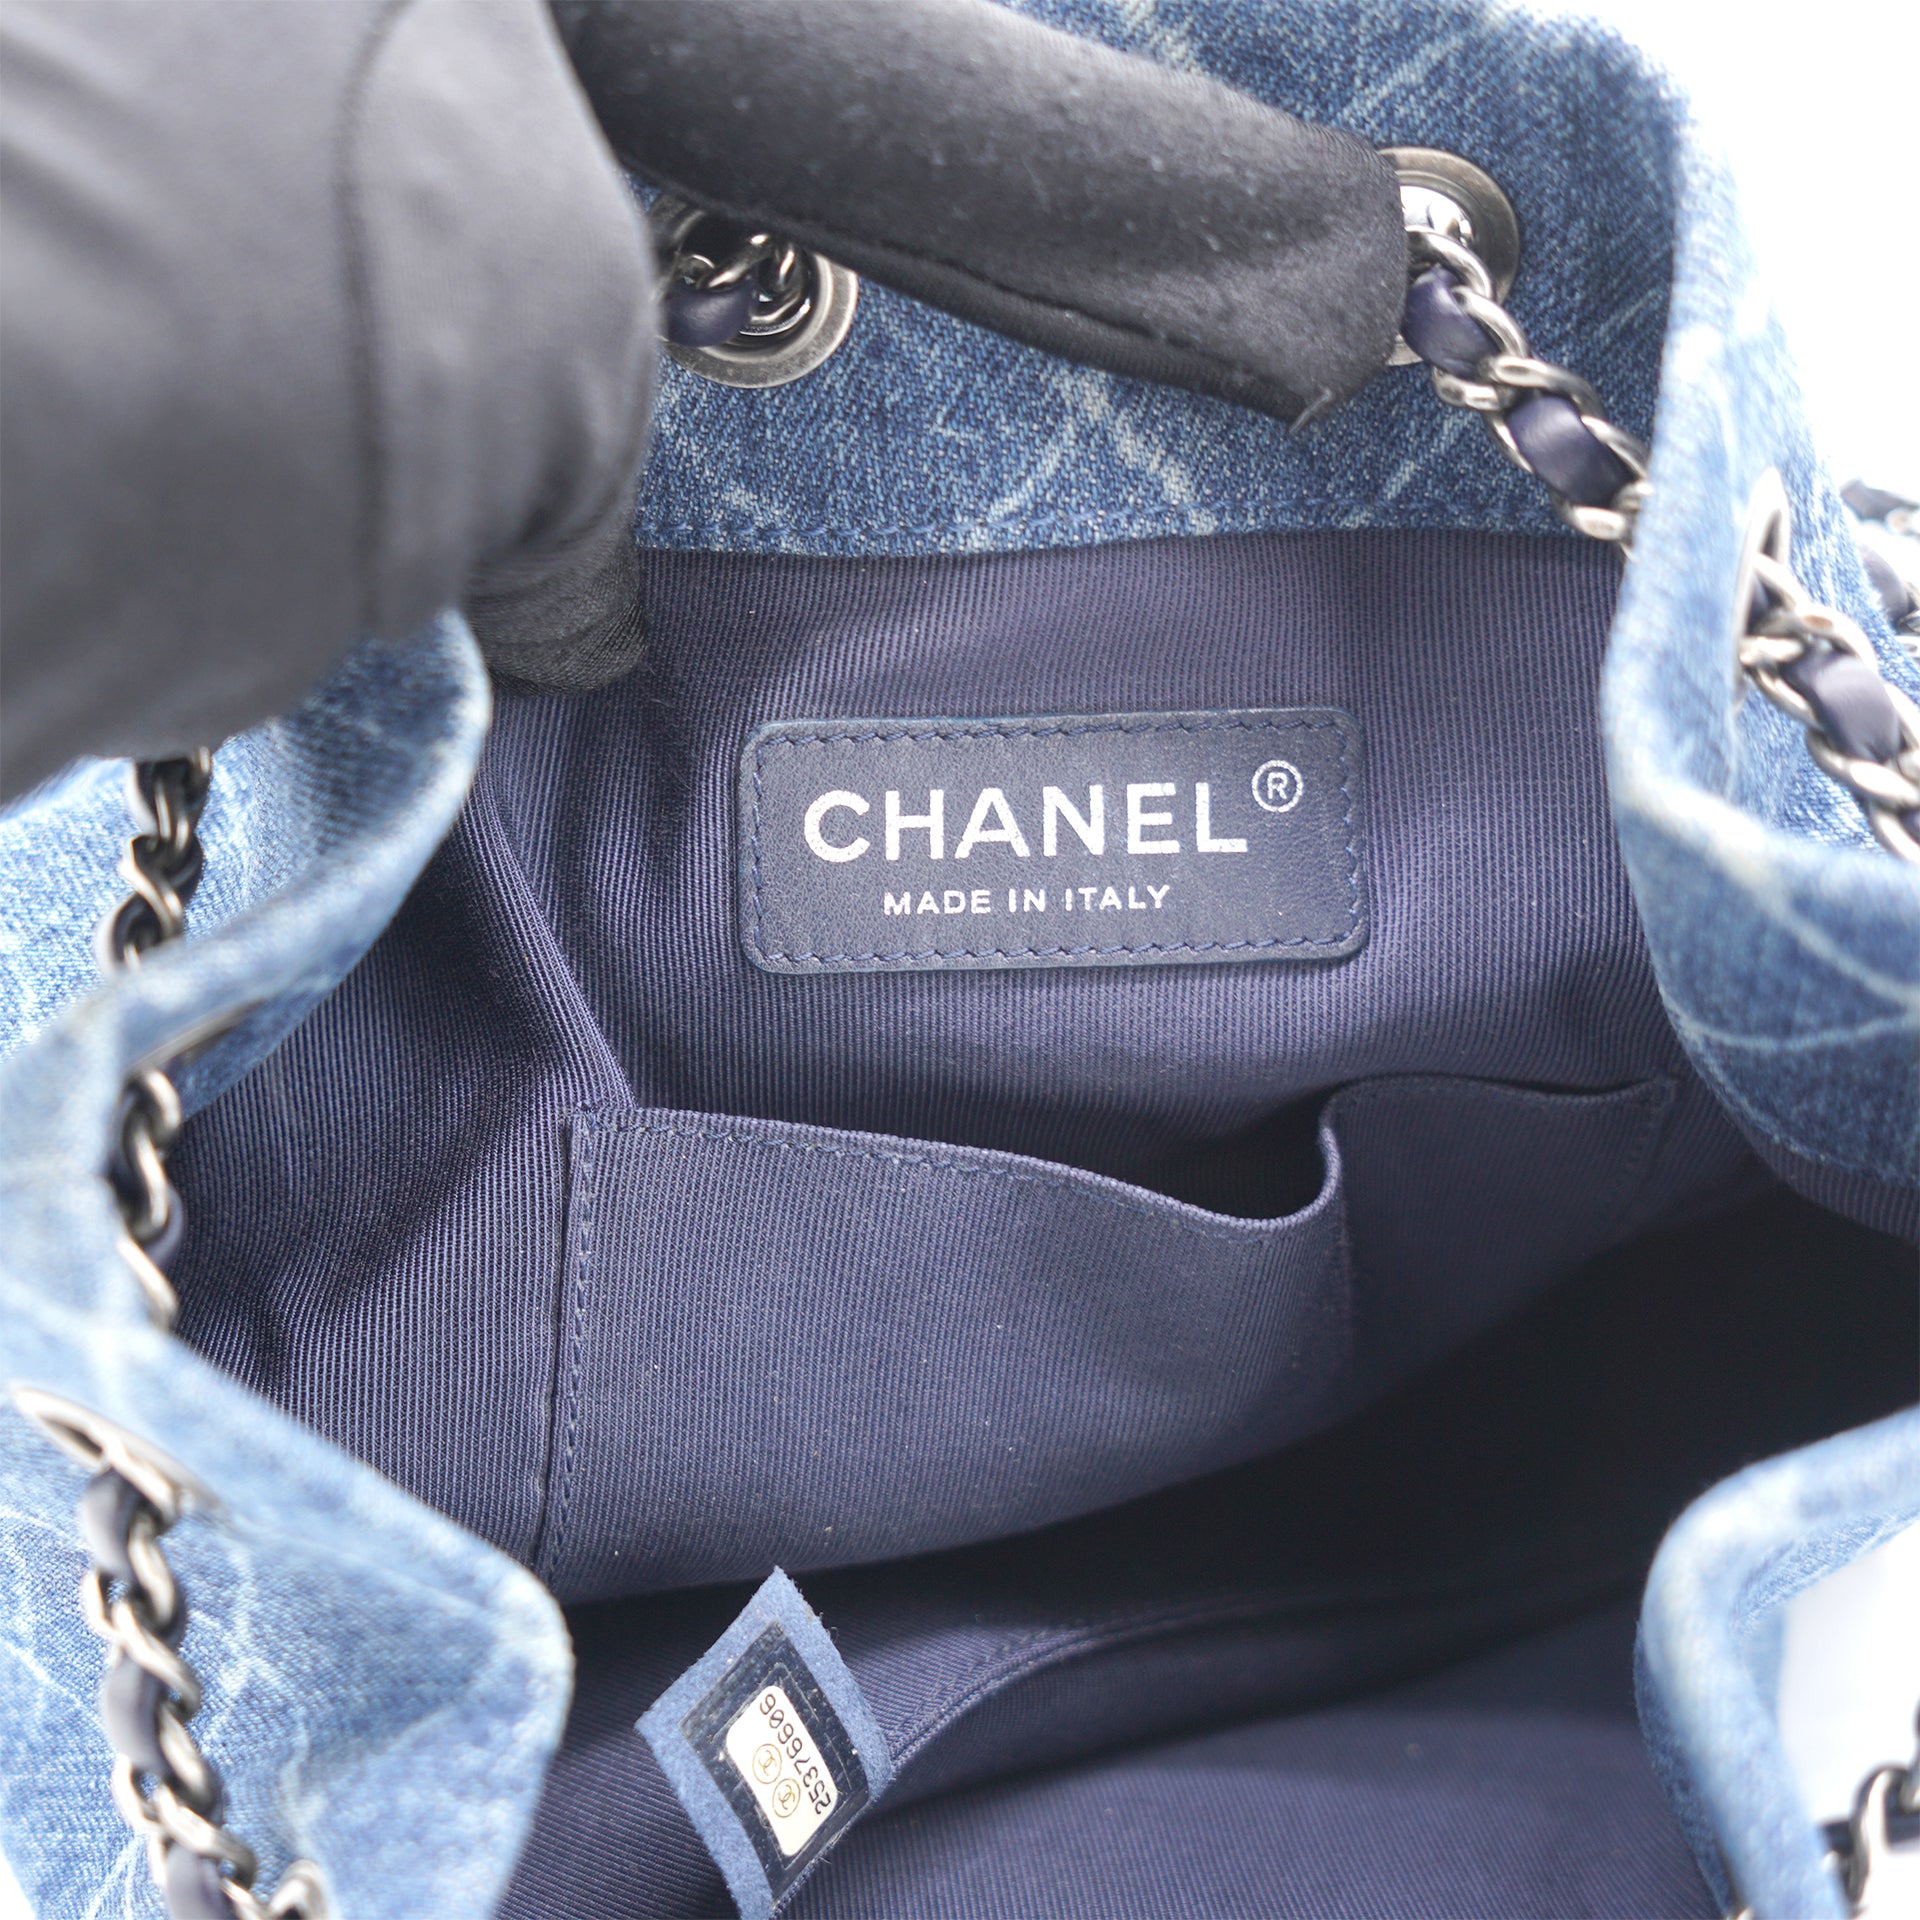 Gabrielle Backpack in Denim/Blue Leather